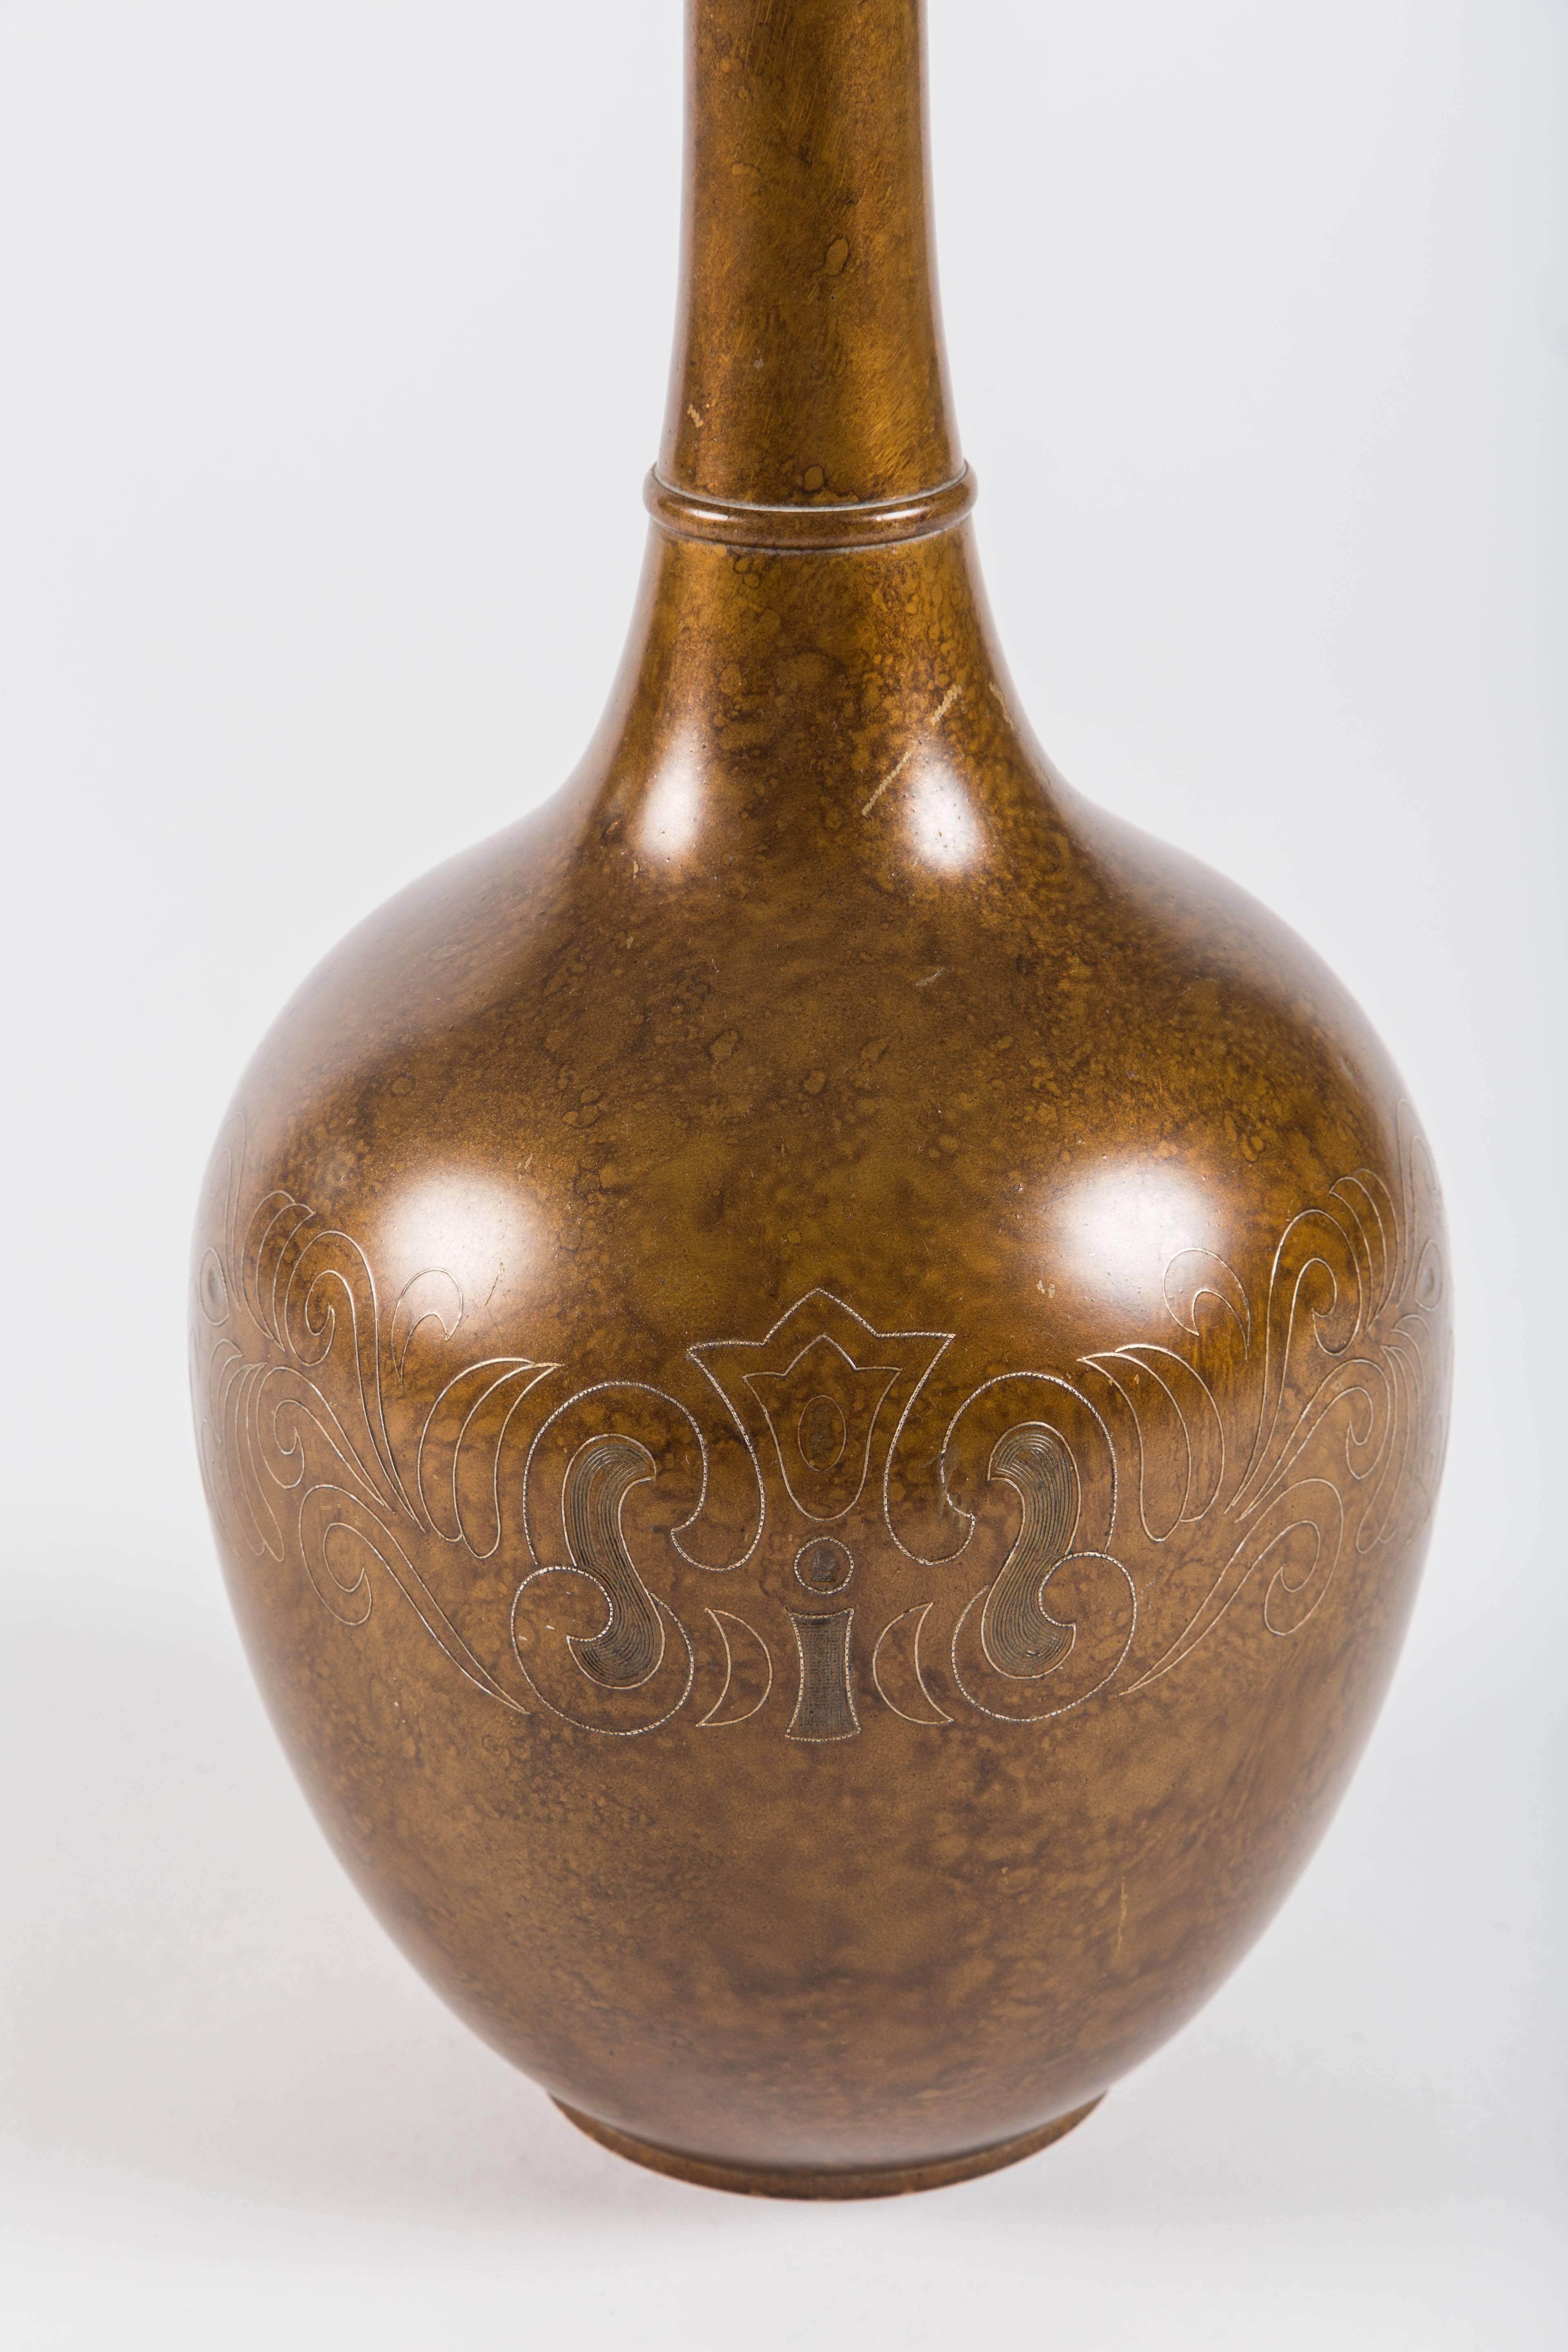 Unknown Patinated Mixed Metal Vase with Middle Eastern Decorative Motif